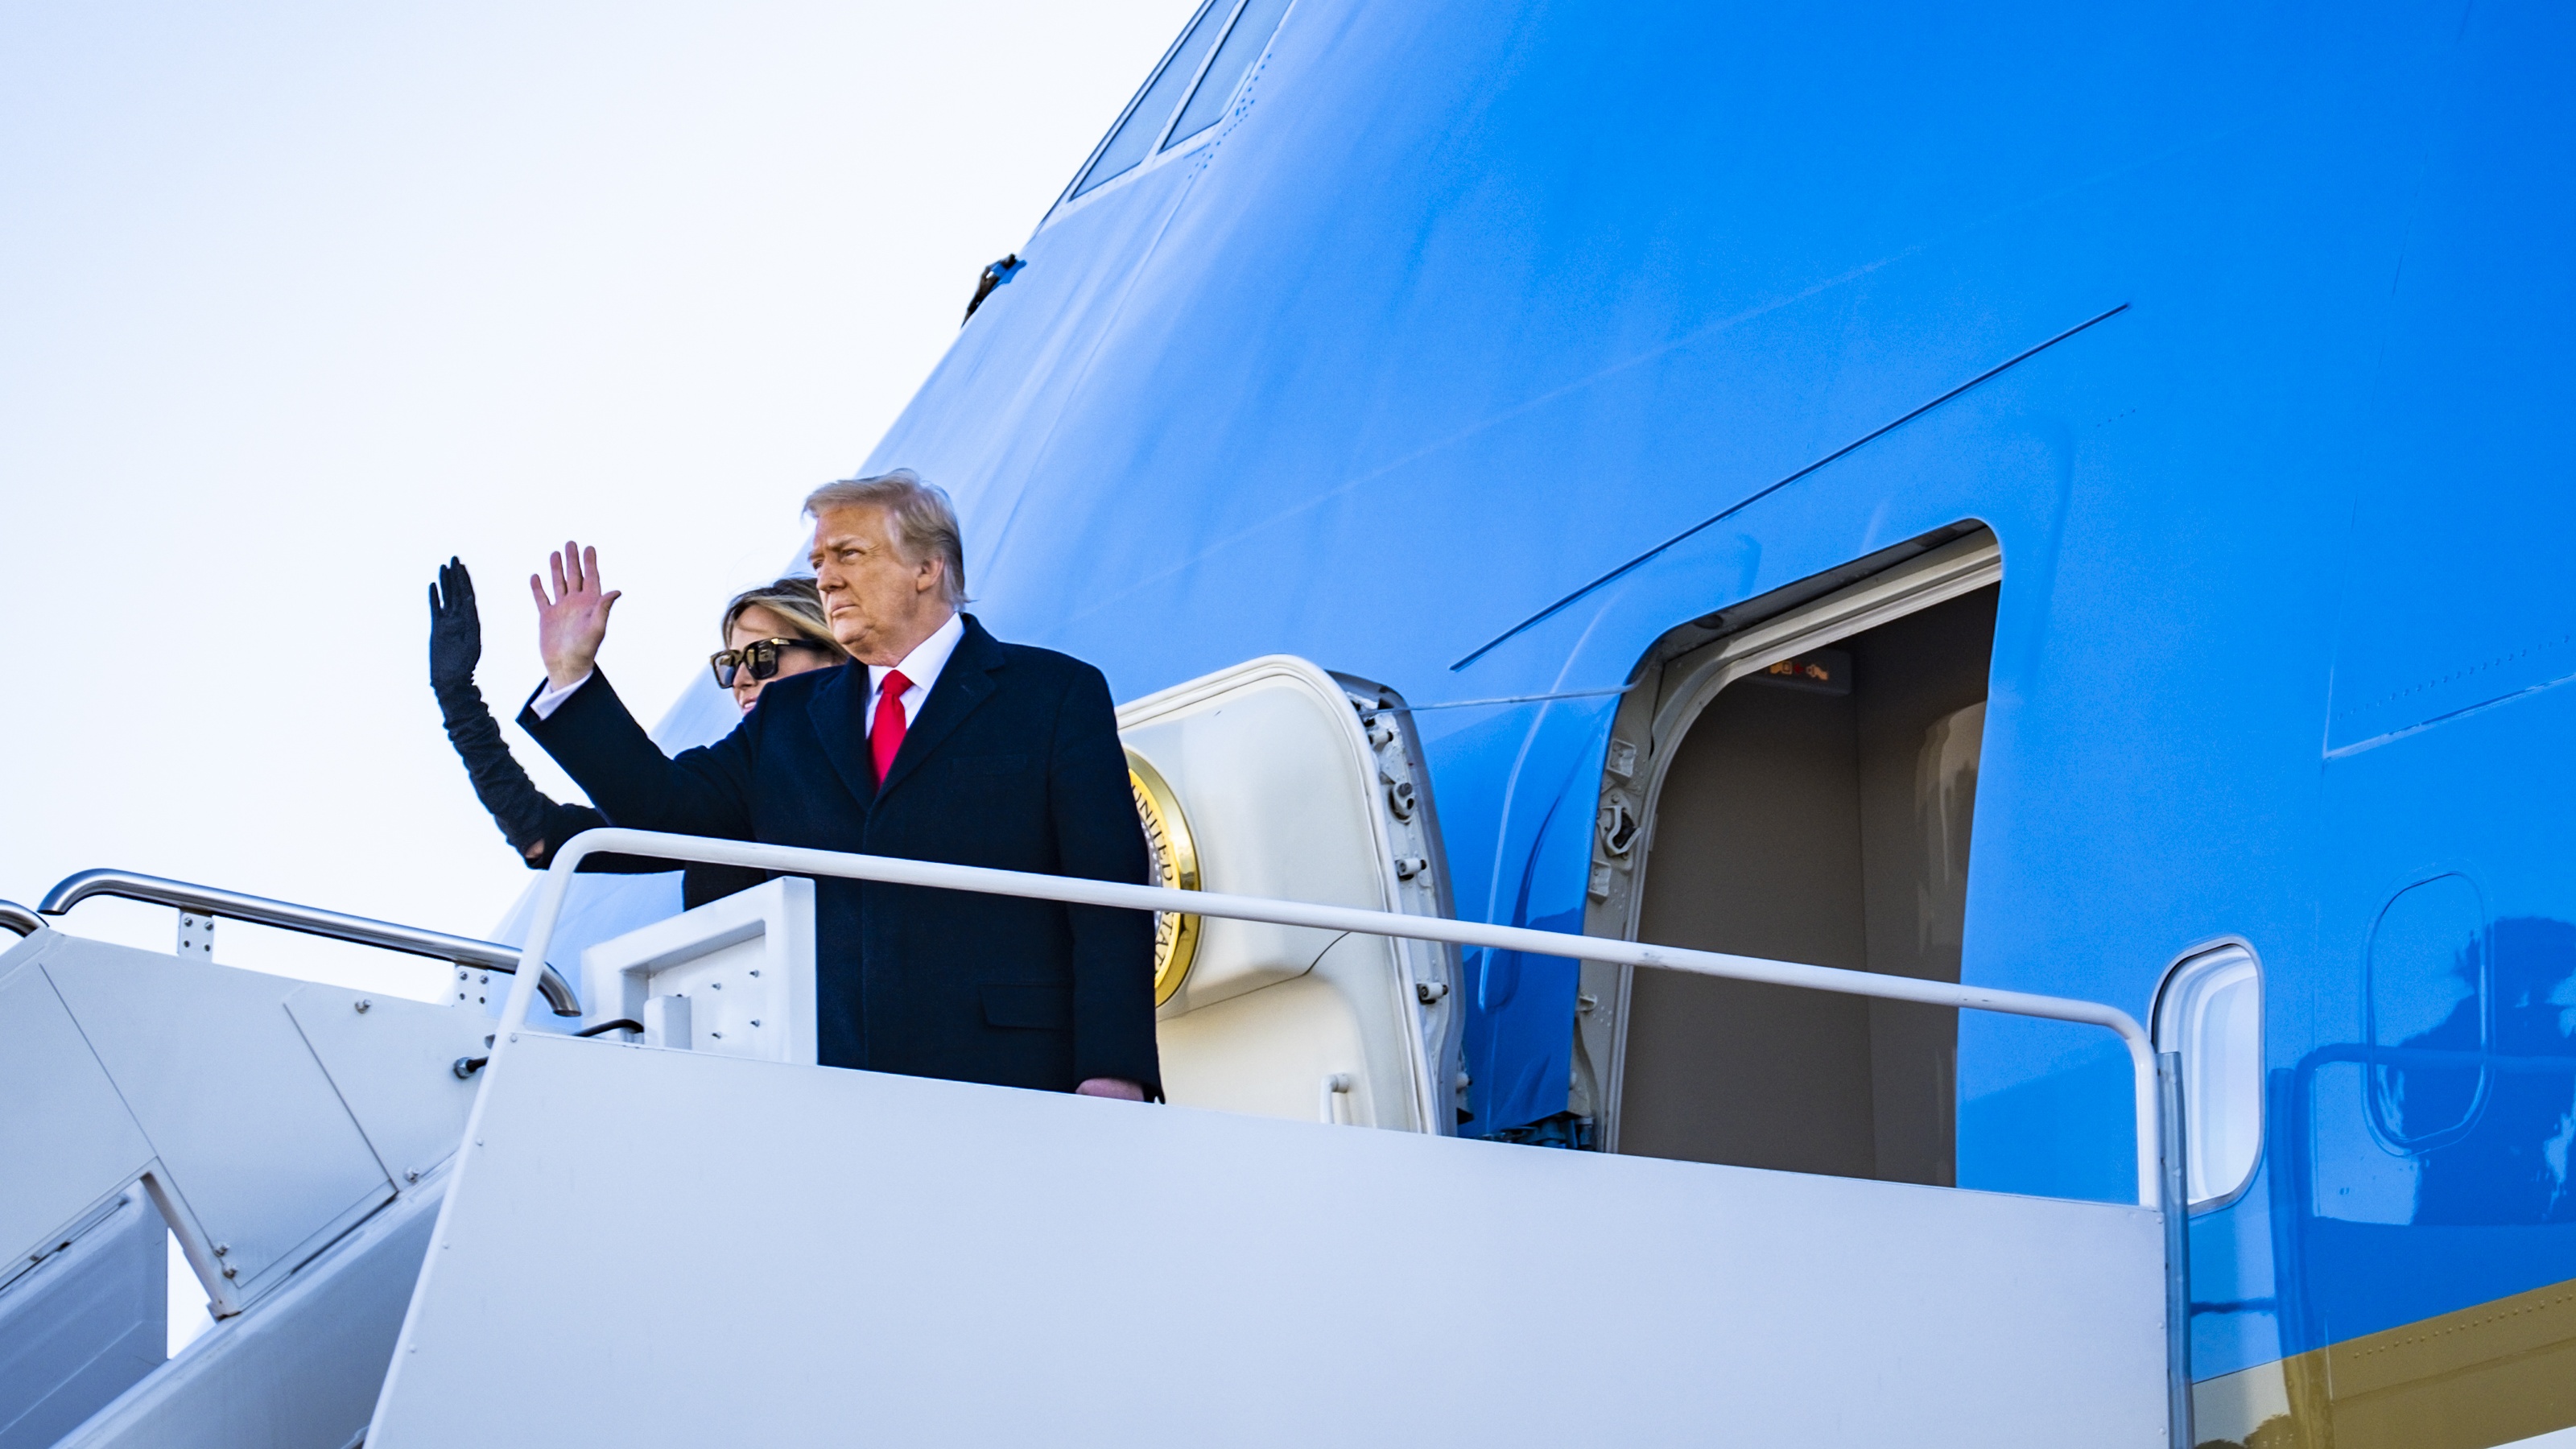 Donald Trump departs for Mar-a-Lago at the end of his presidency